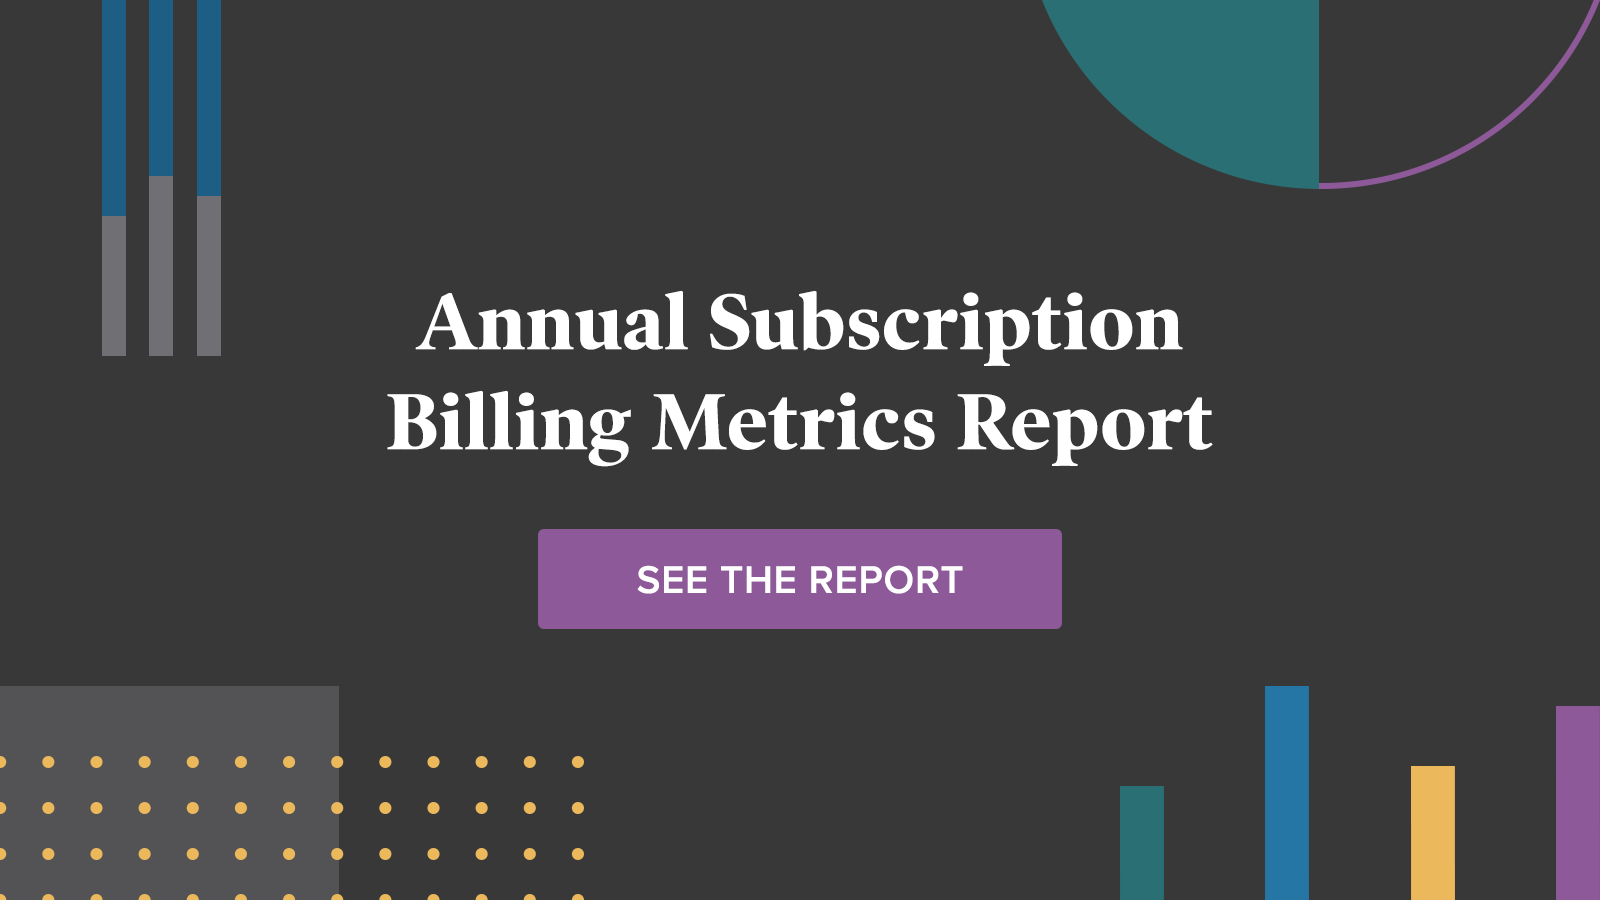 Annual Subscription Billing Metrics Report cover graphic on dark background